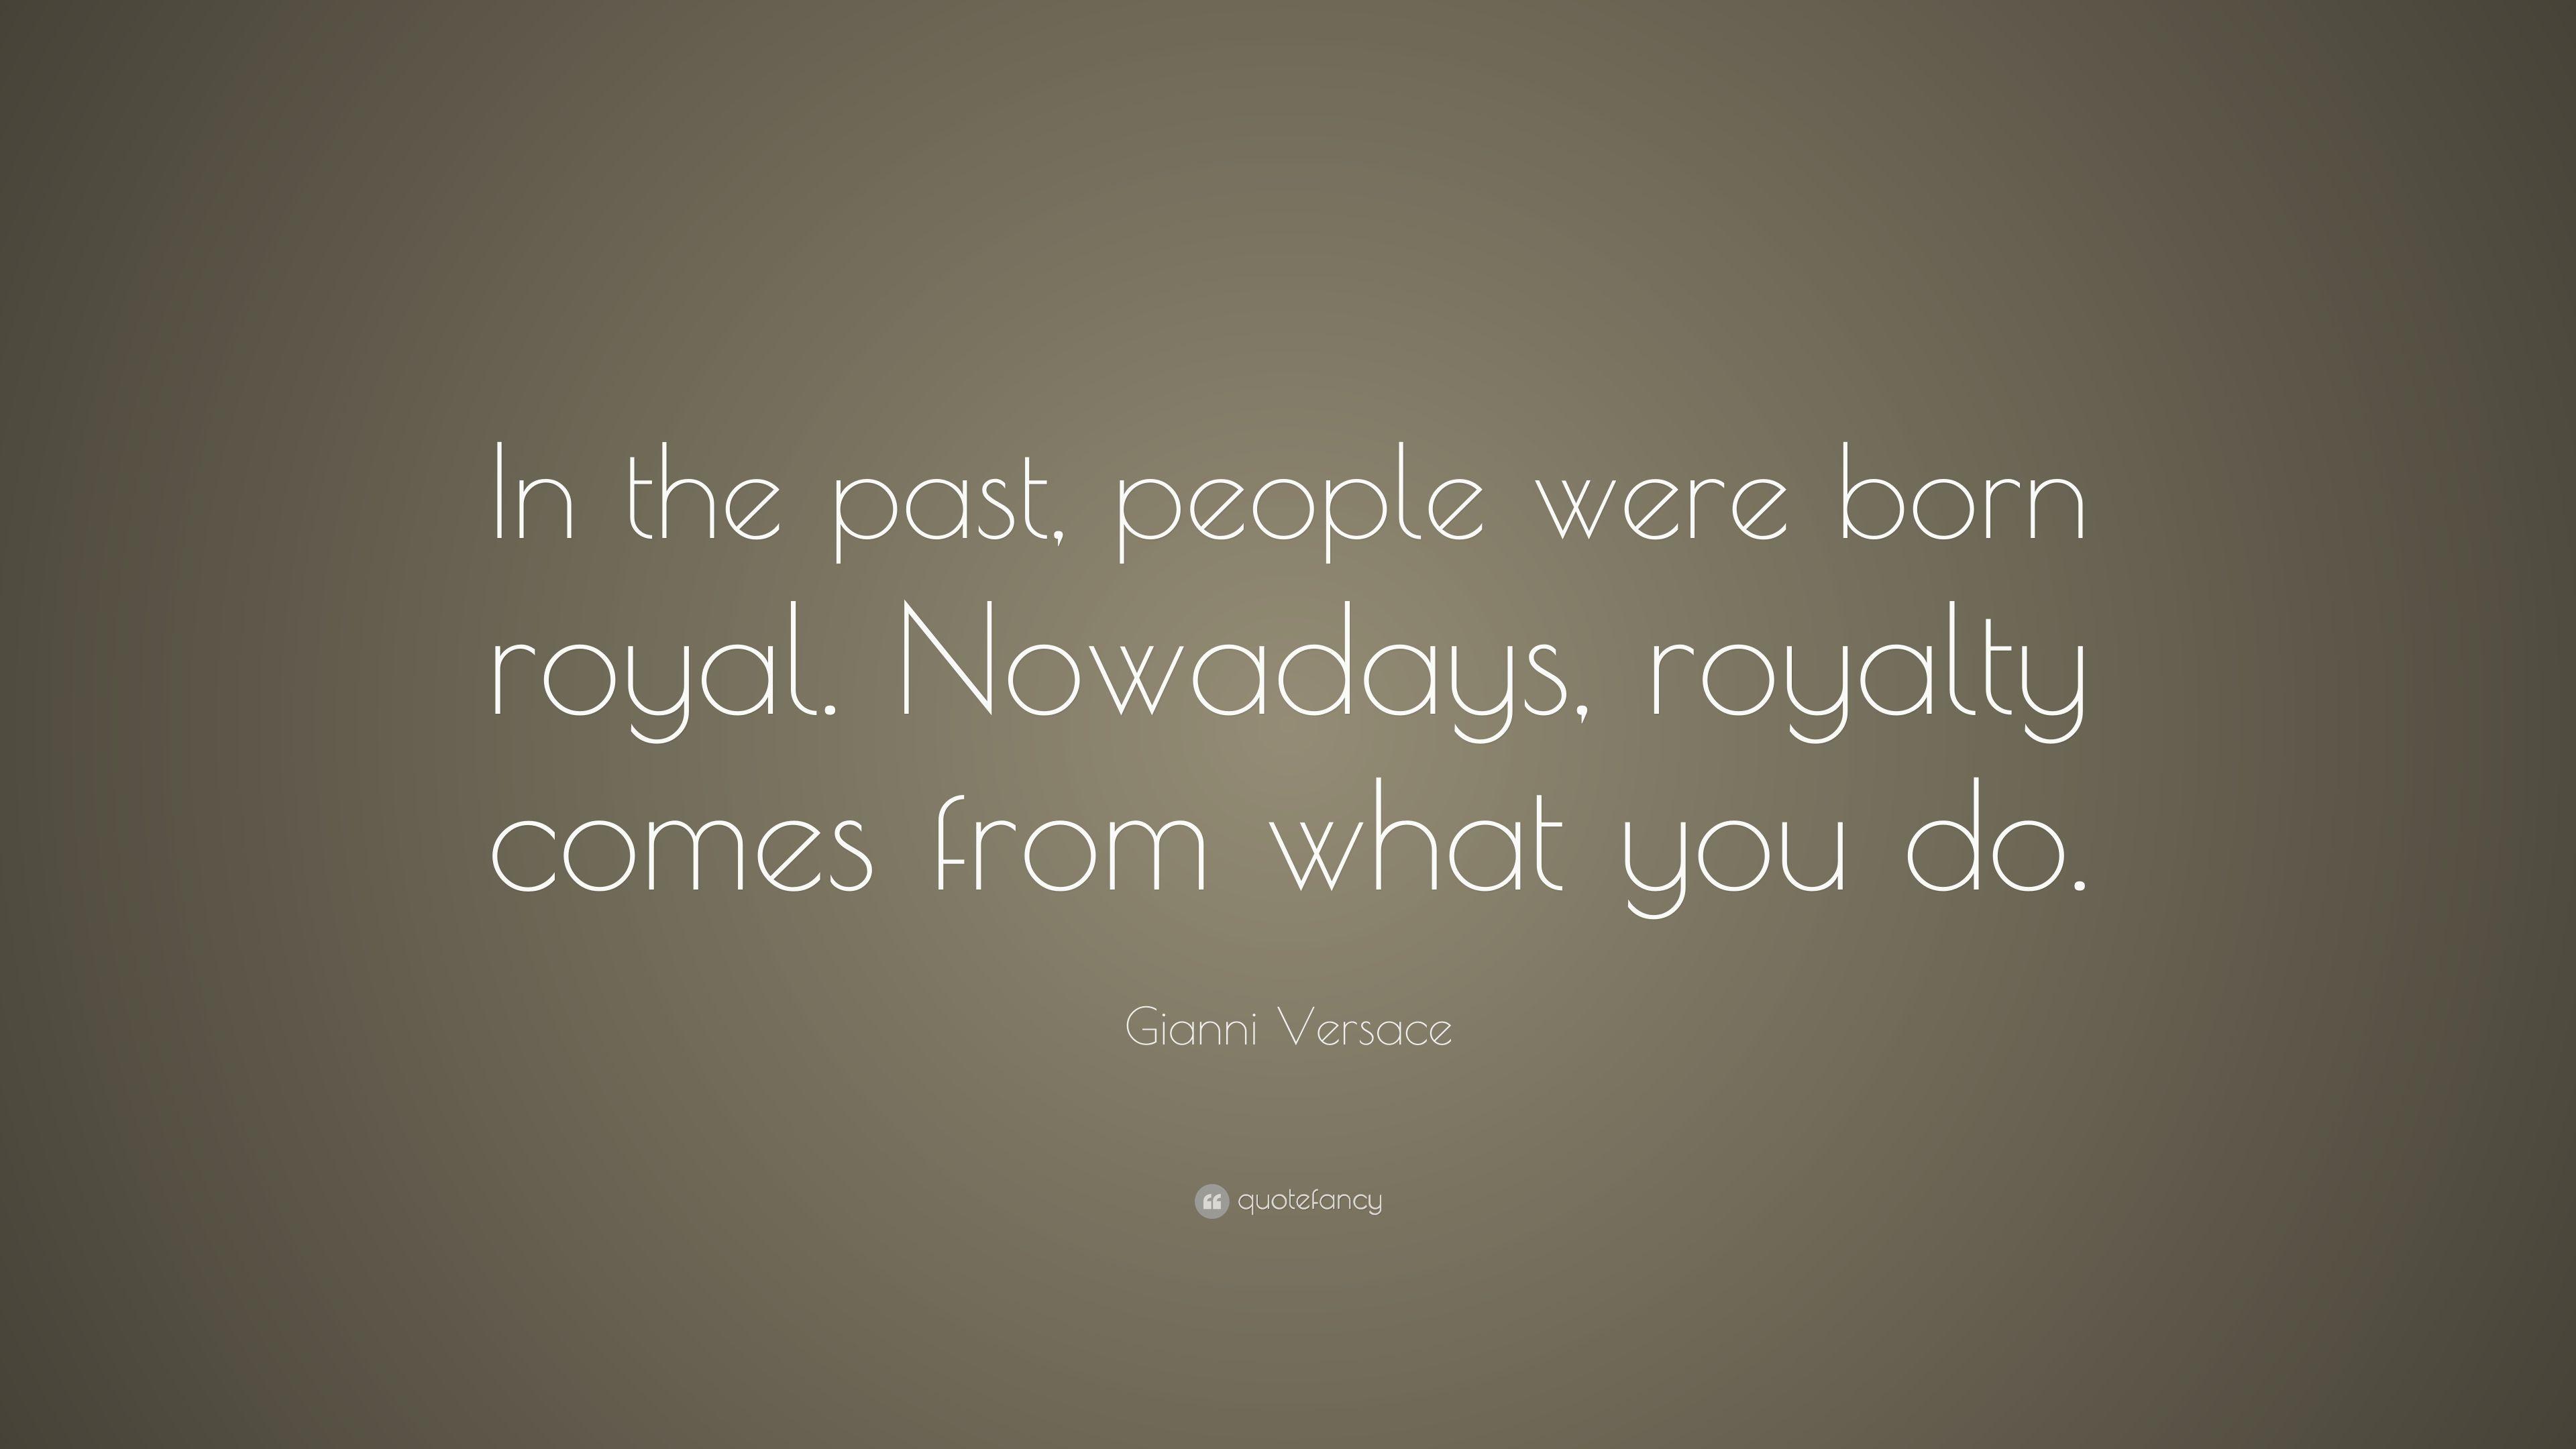 Gianni Versace Quote: “In the past, people were born royal